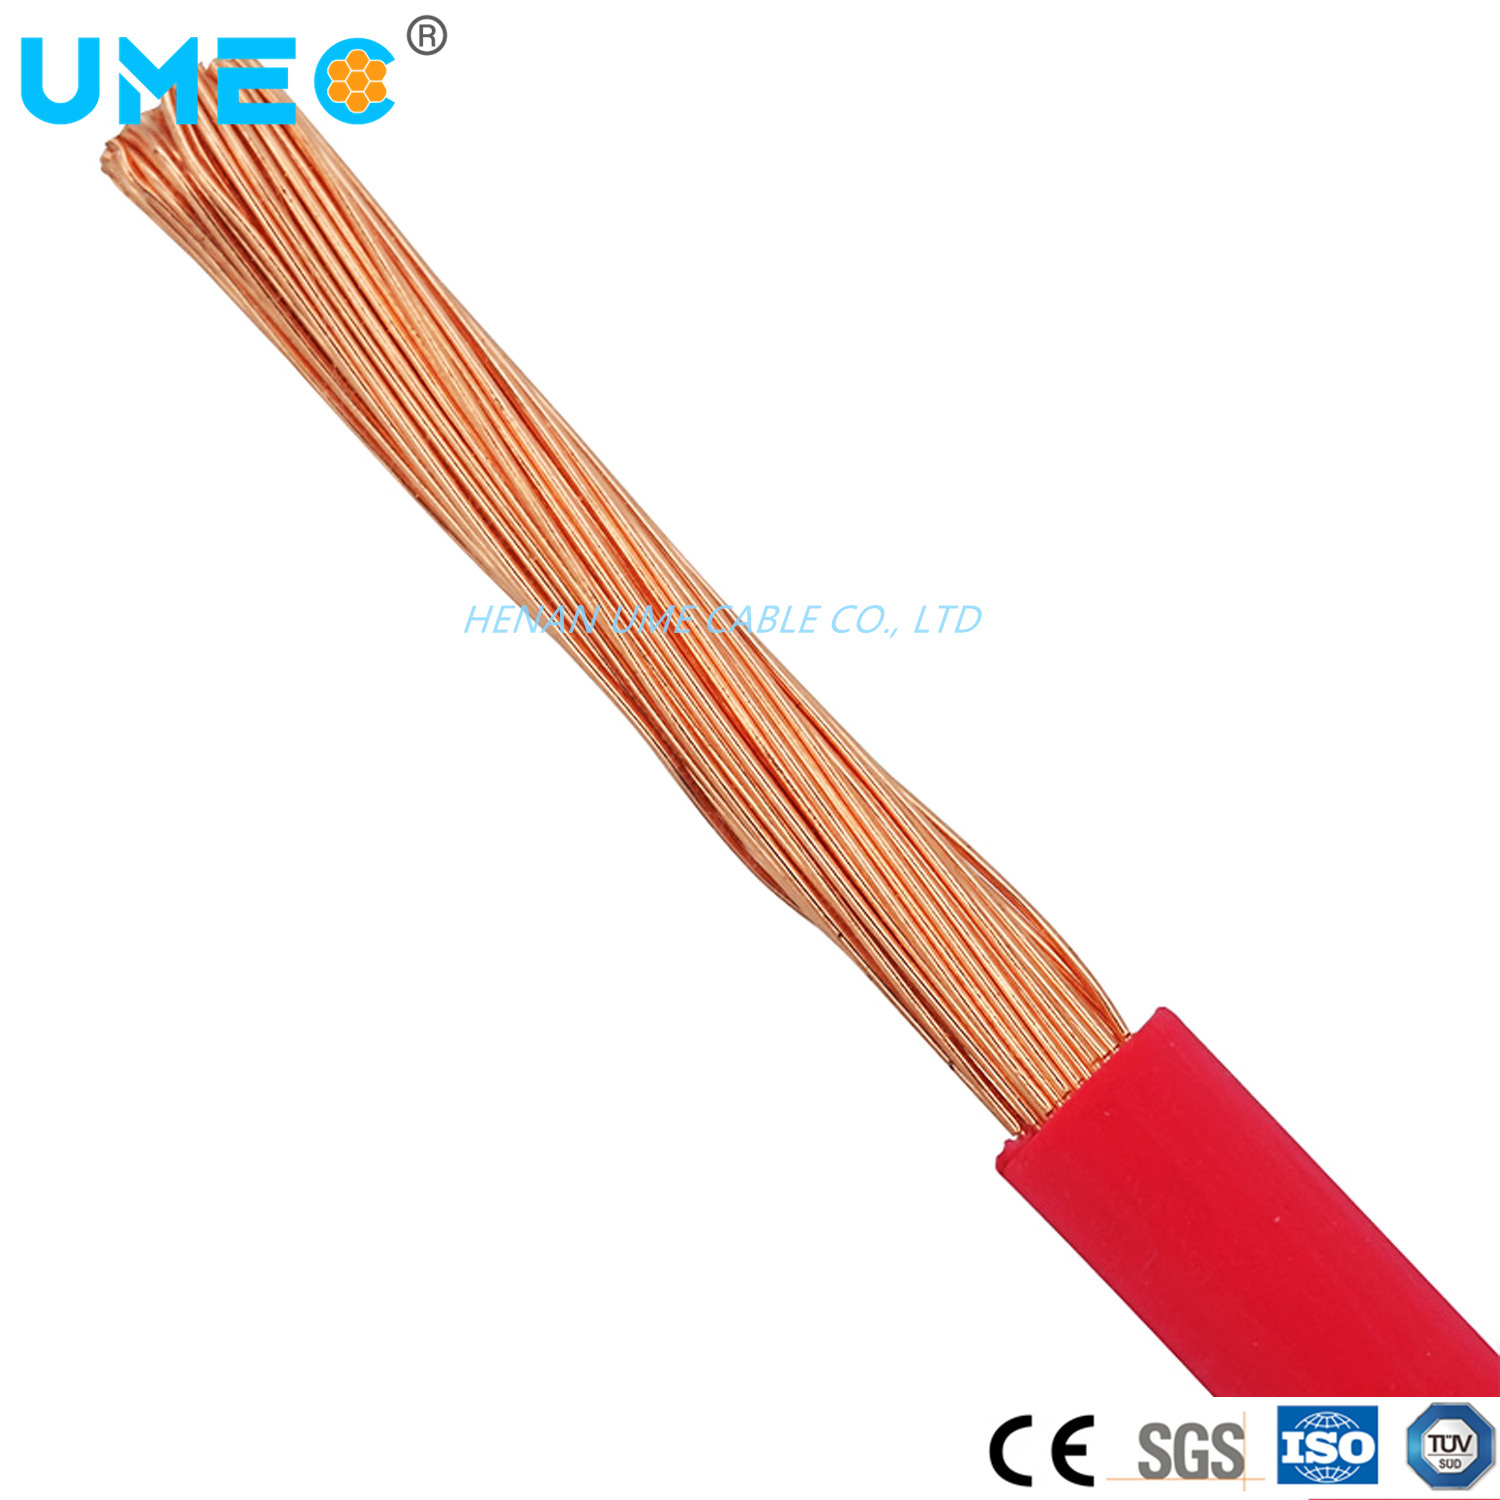 Super Flexible PVC Insulated Construction Wire 25mm2 Copper Electrical Cable Wire RV